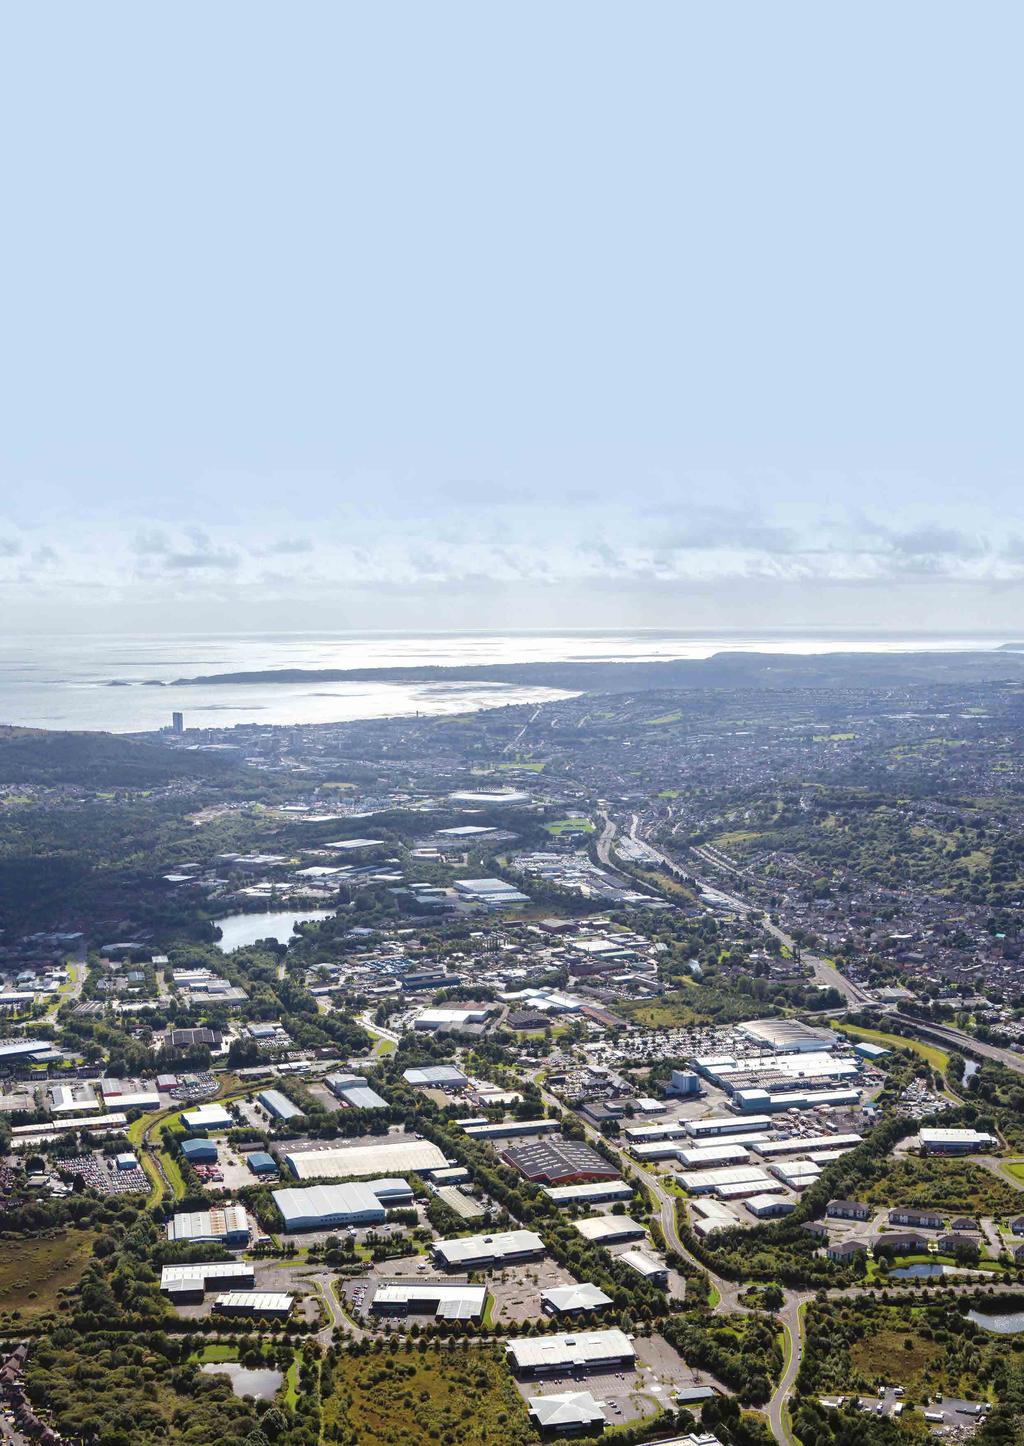 48 Gower 47 46 Swansea 45 44 43 42 41 Neath 40 Port Talbot Situation is located on the northern periphery of the well-established Swansea Enterprise Park regarded as the prime industrial location in